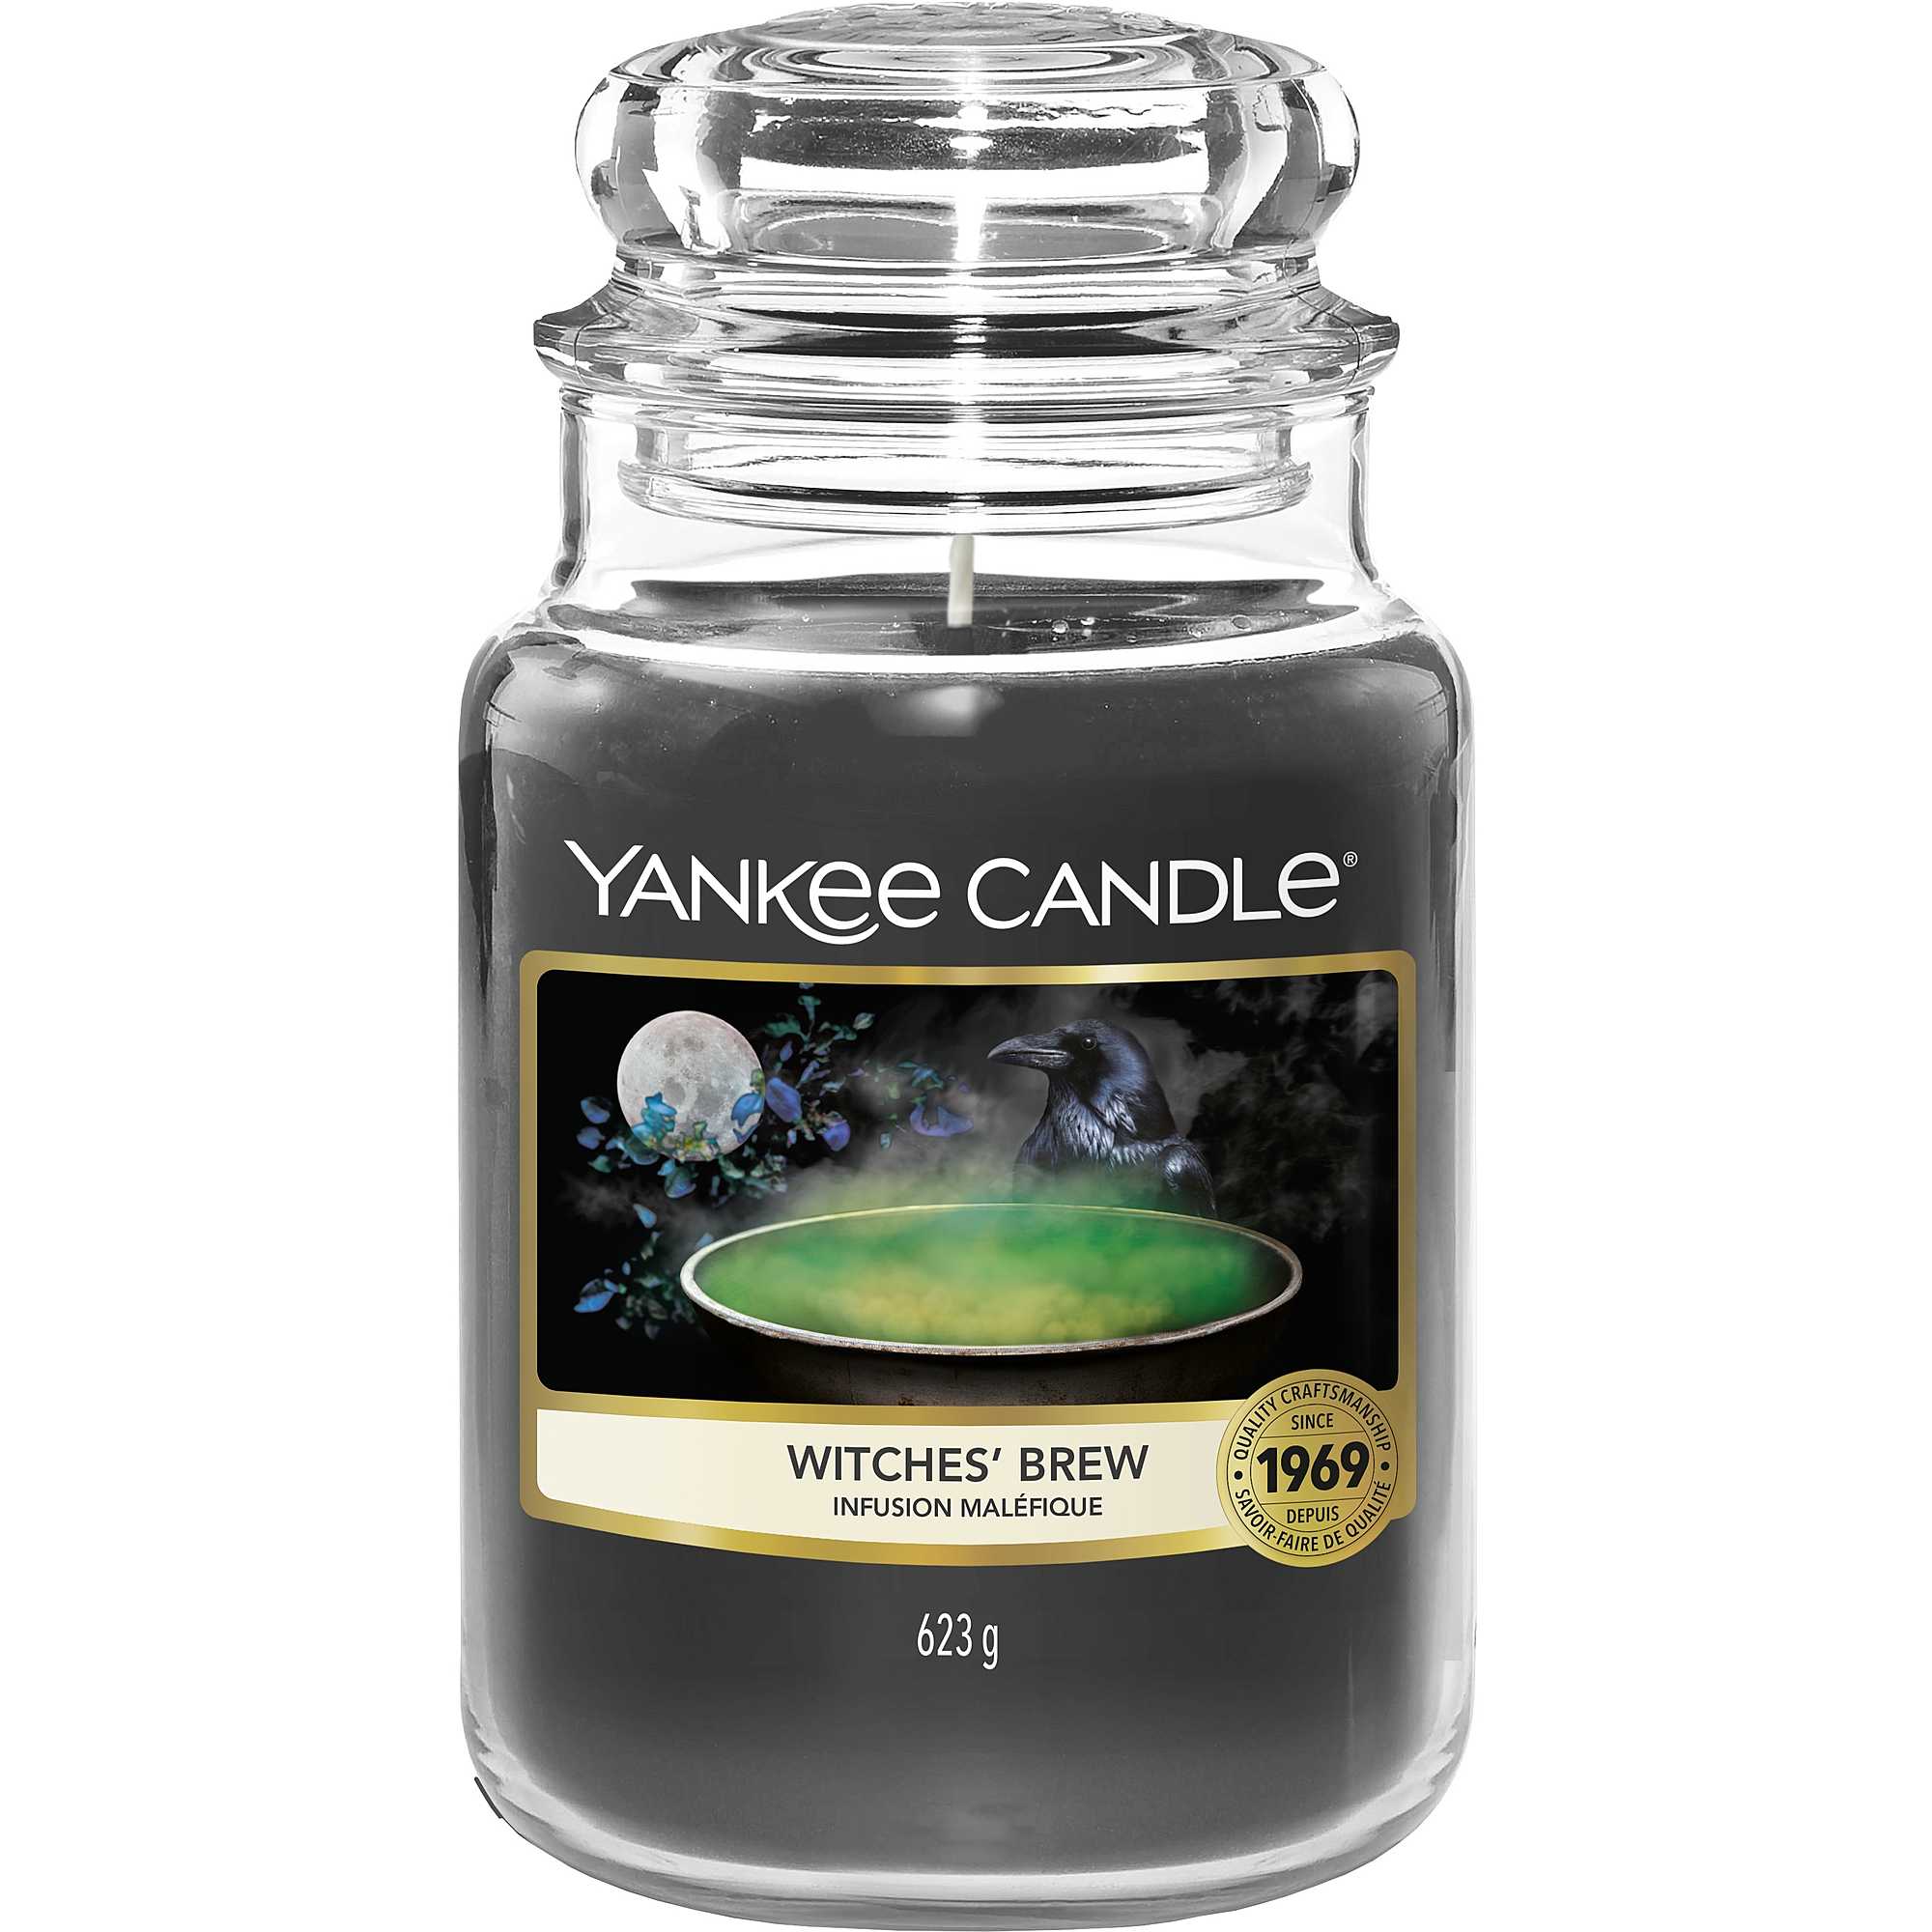 Yankee Candle Witches' Brew Giara Grande 623g